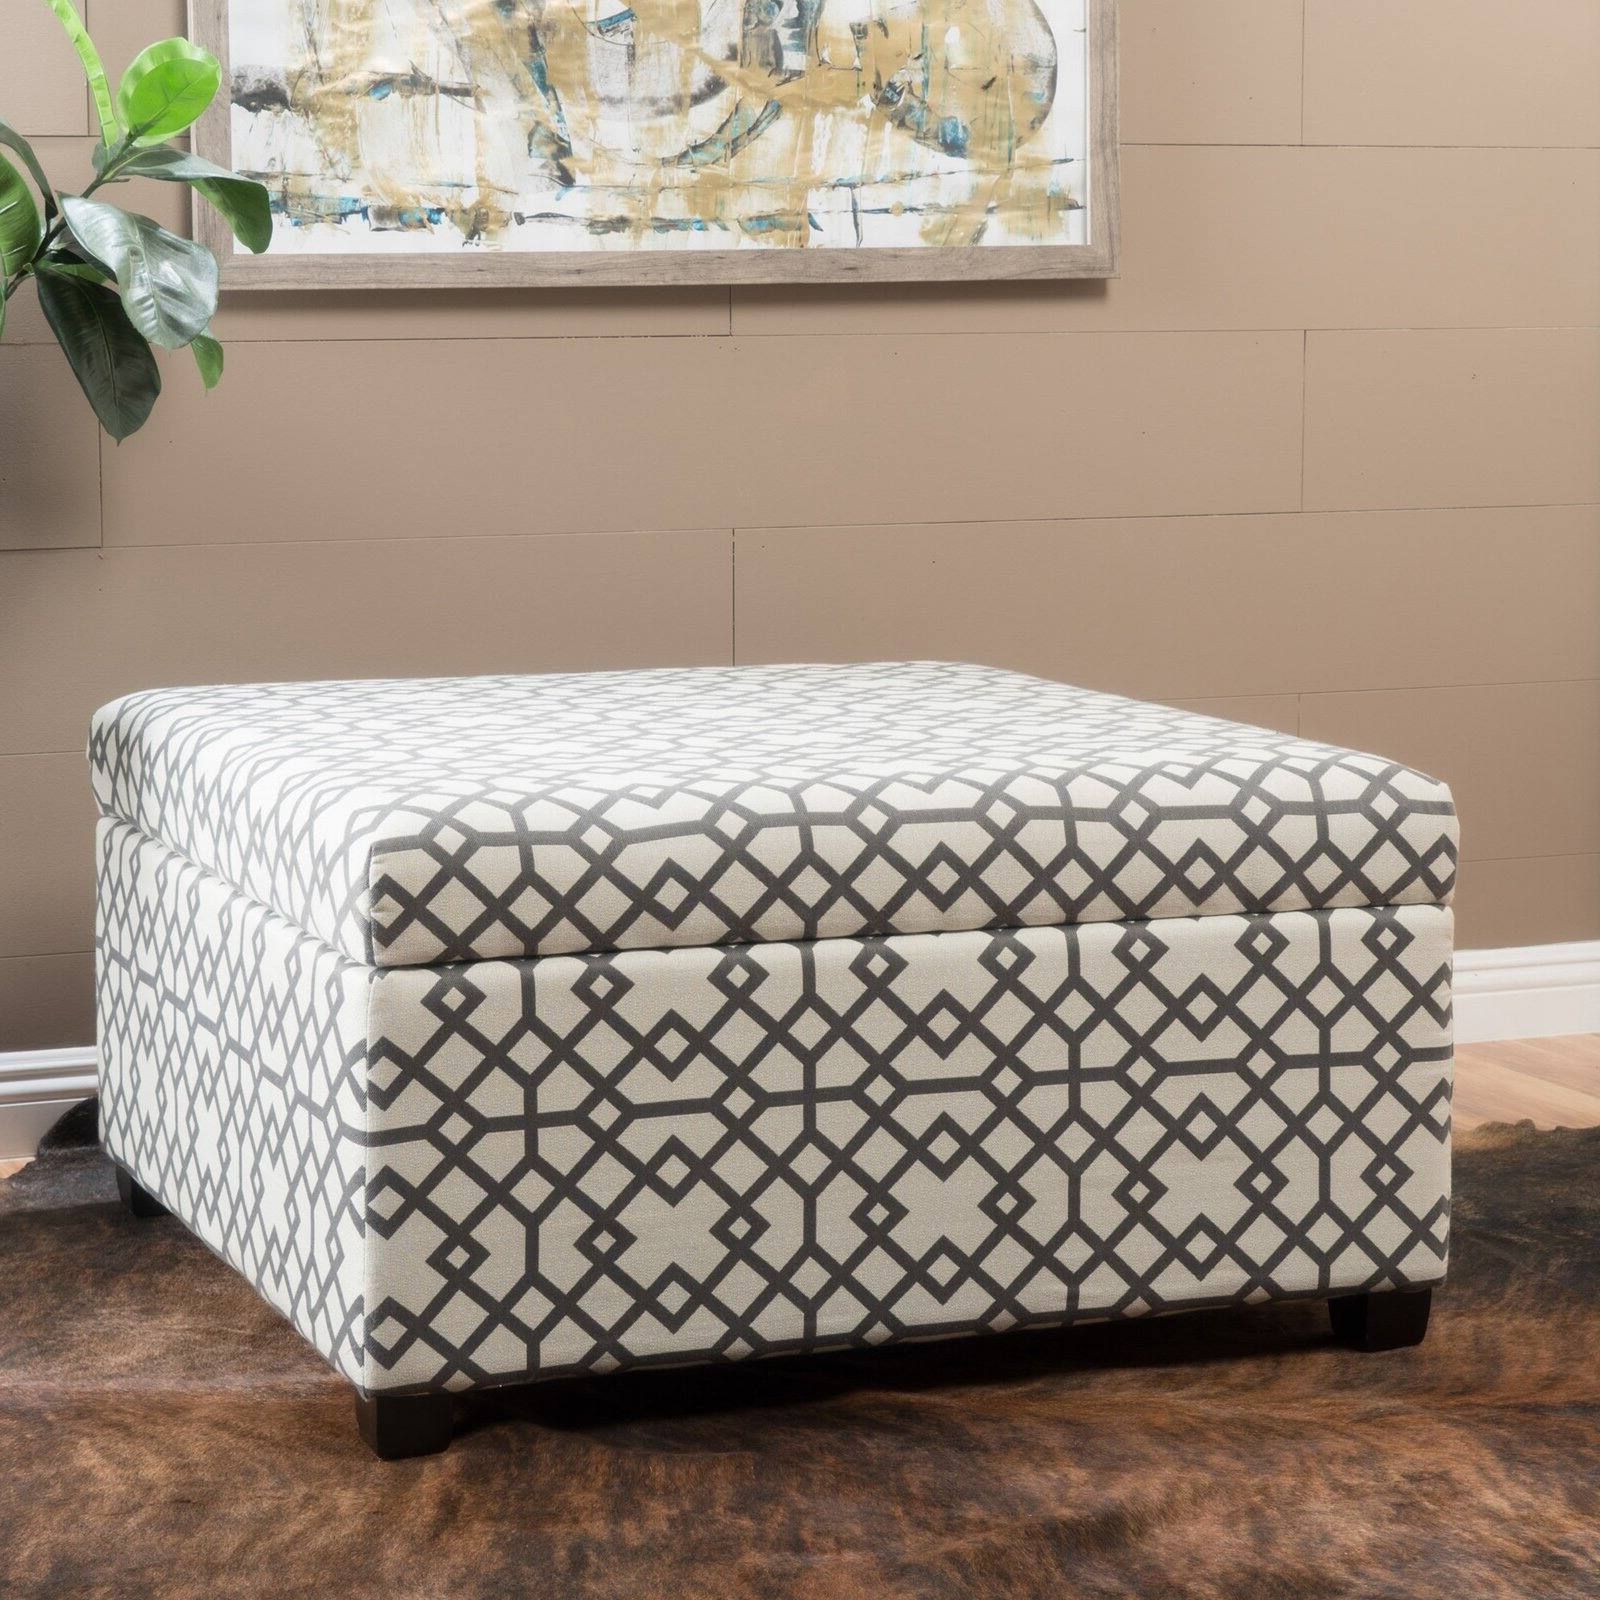 Brushed Geometric Pattern Ottomans Within Most Popular Tempest Geometric Patterned Fabric Storage Ottoman – Walmart (View 4 of 10)